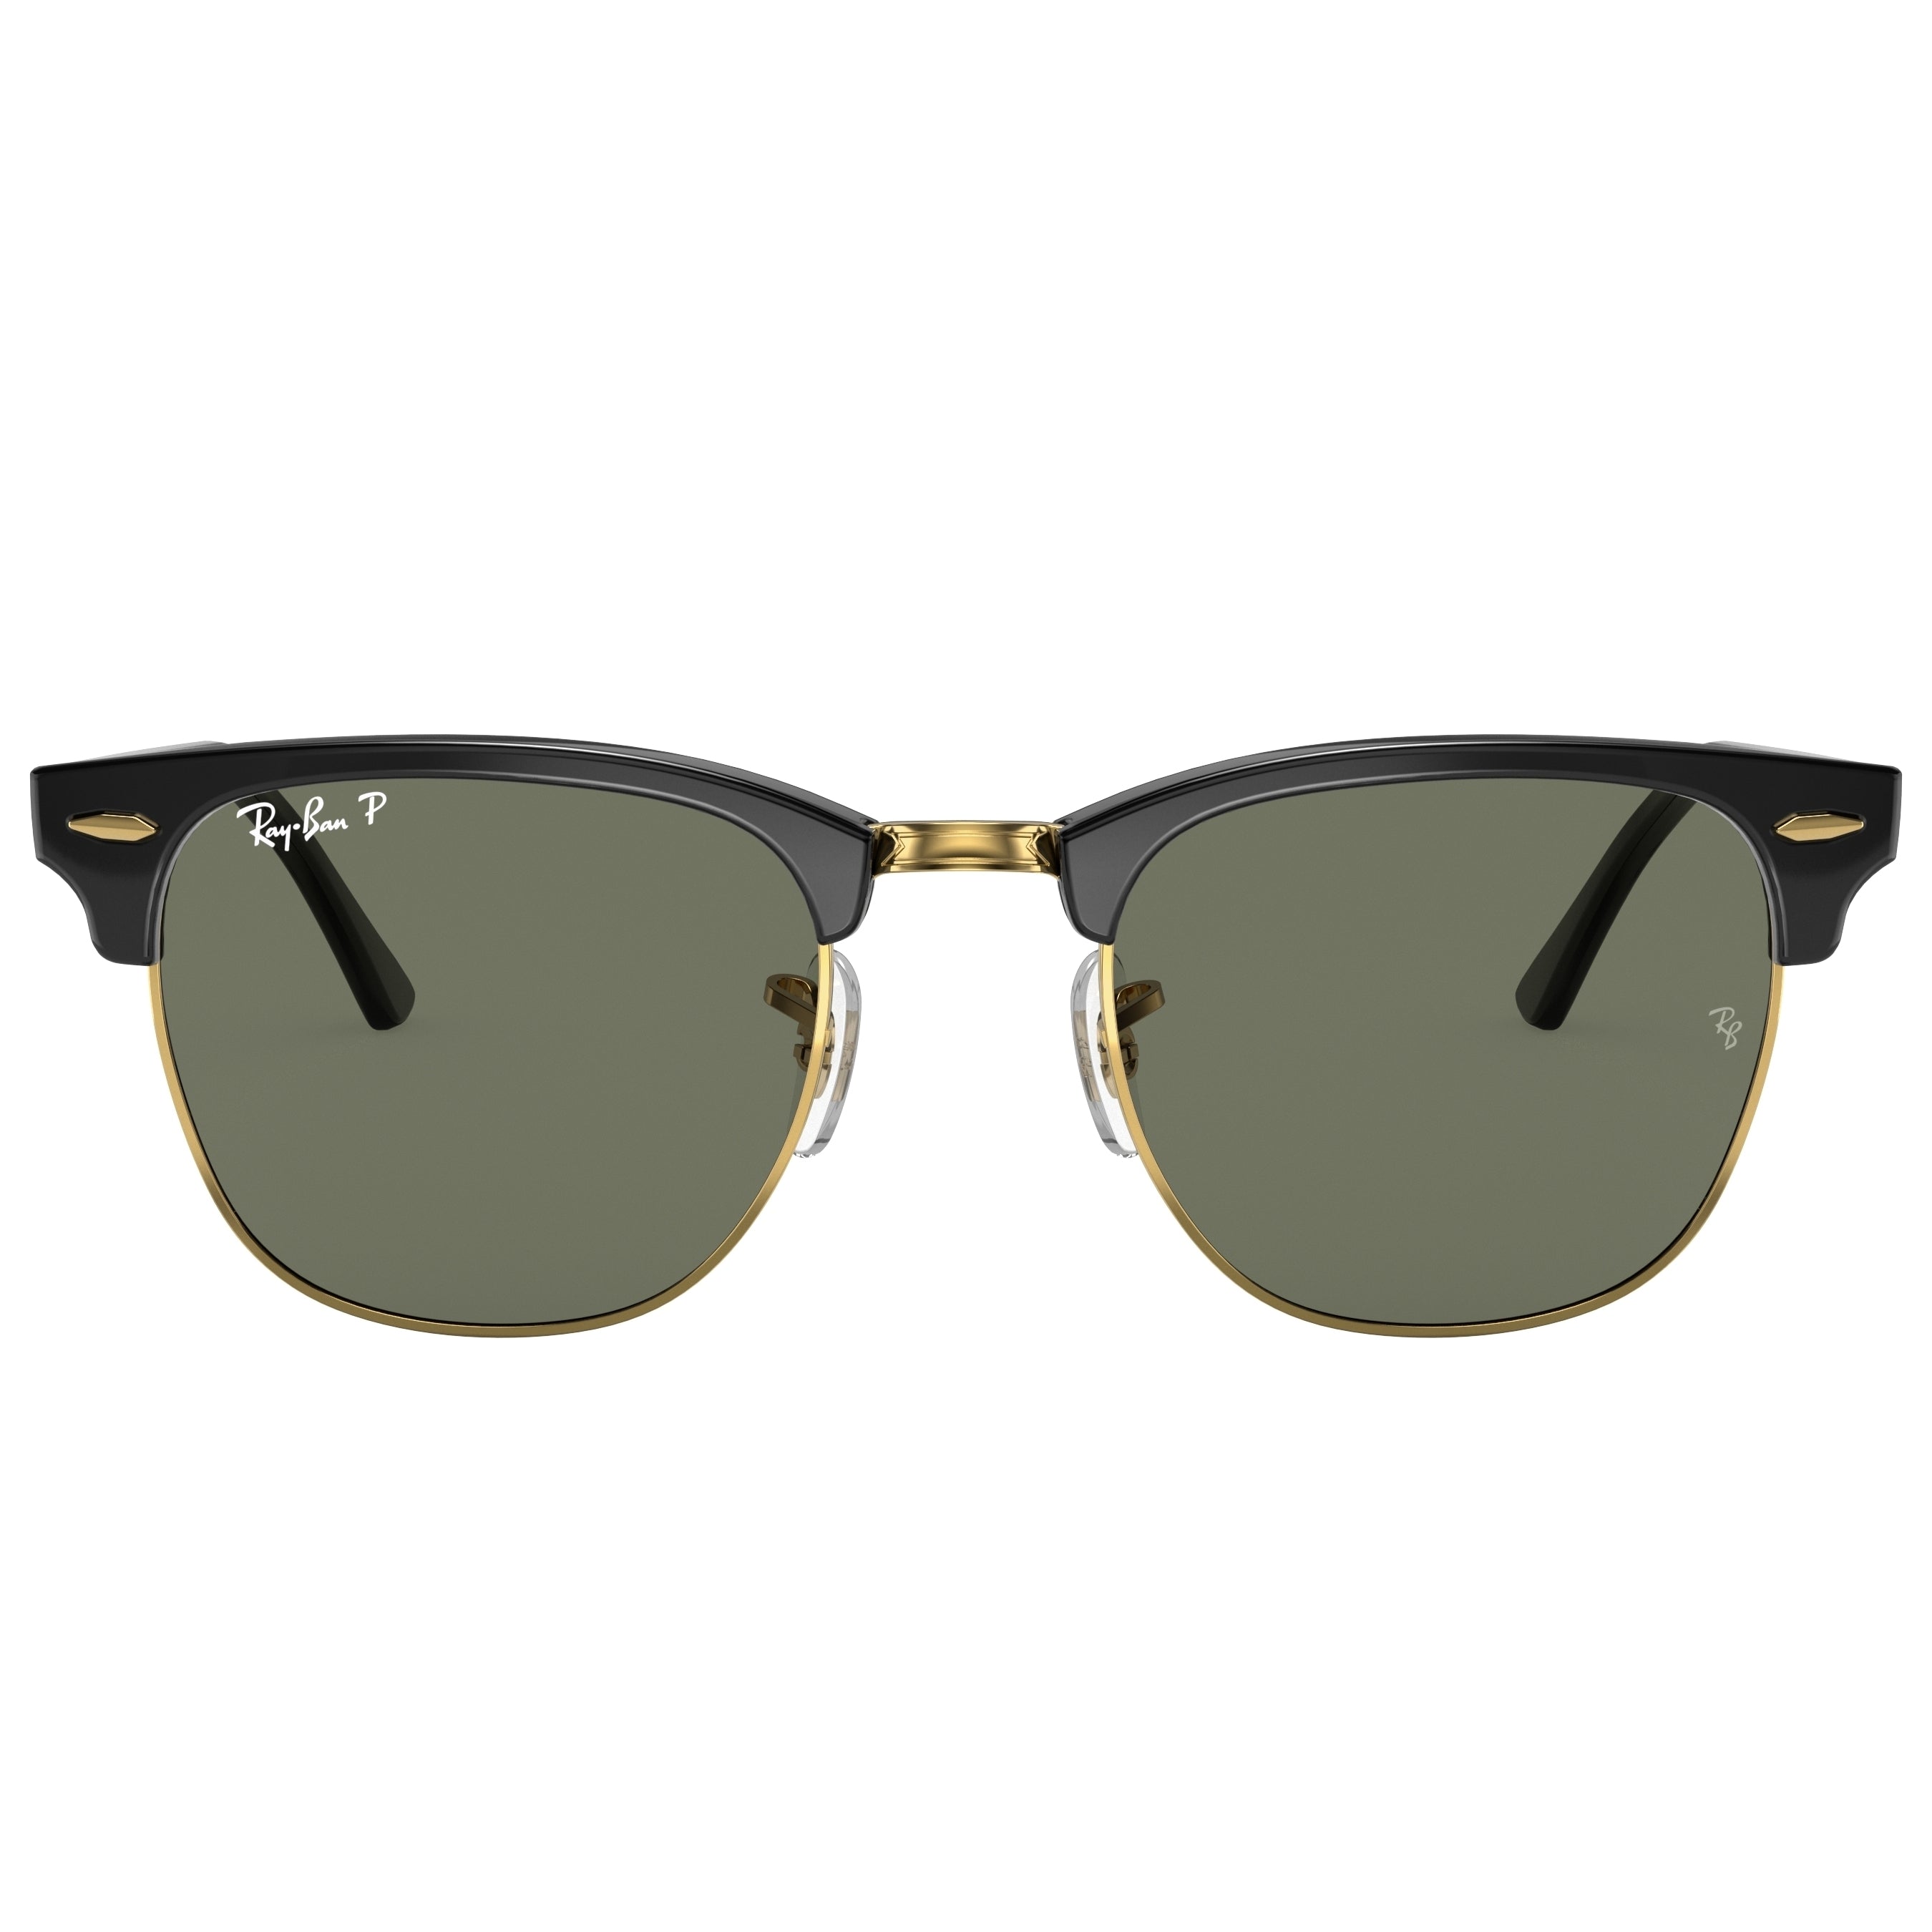 Ray-Ban Clubmaster Classic Green Classic G-15 Square Unisex Sunglasses RB3016 901/58 49